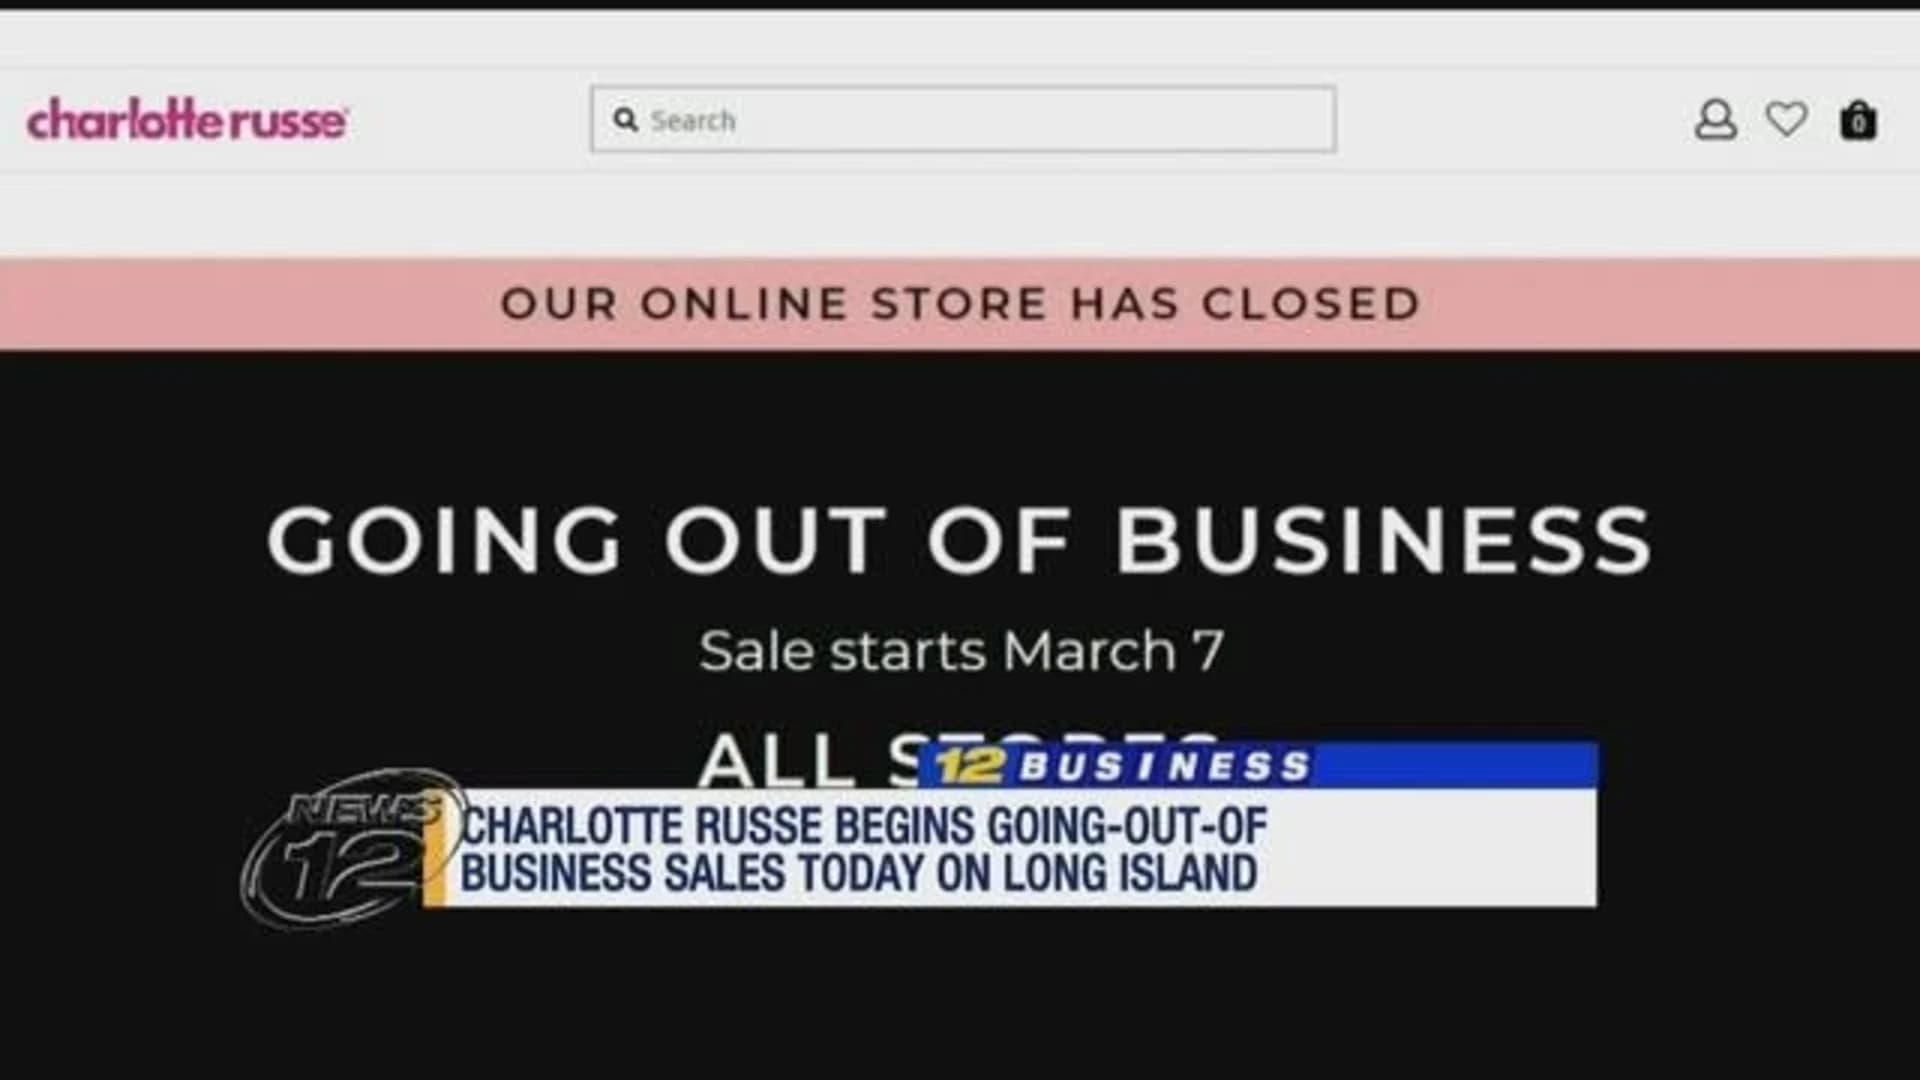 7 Charlotte Russe stores going out of business on Long Island